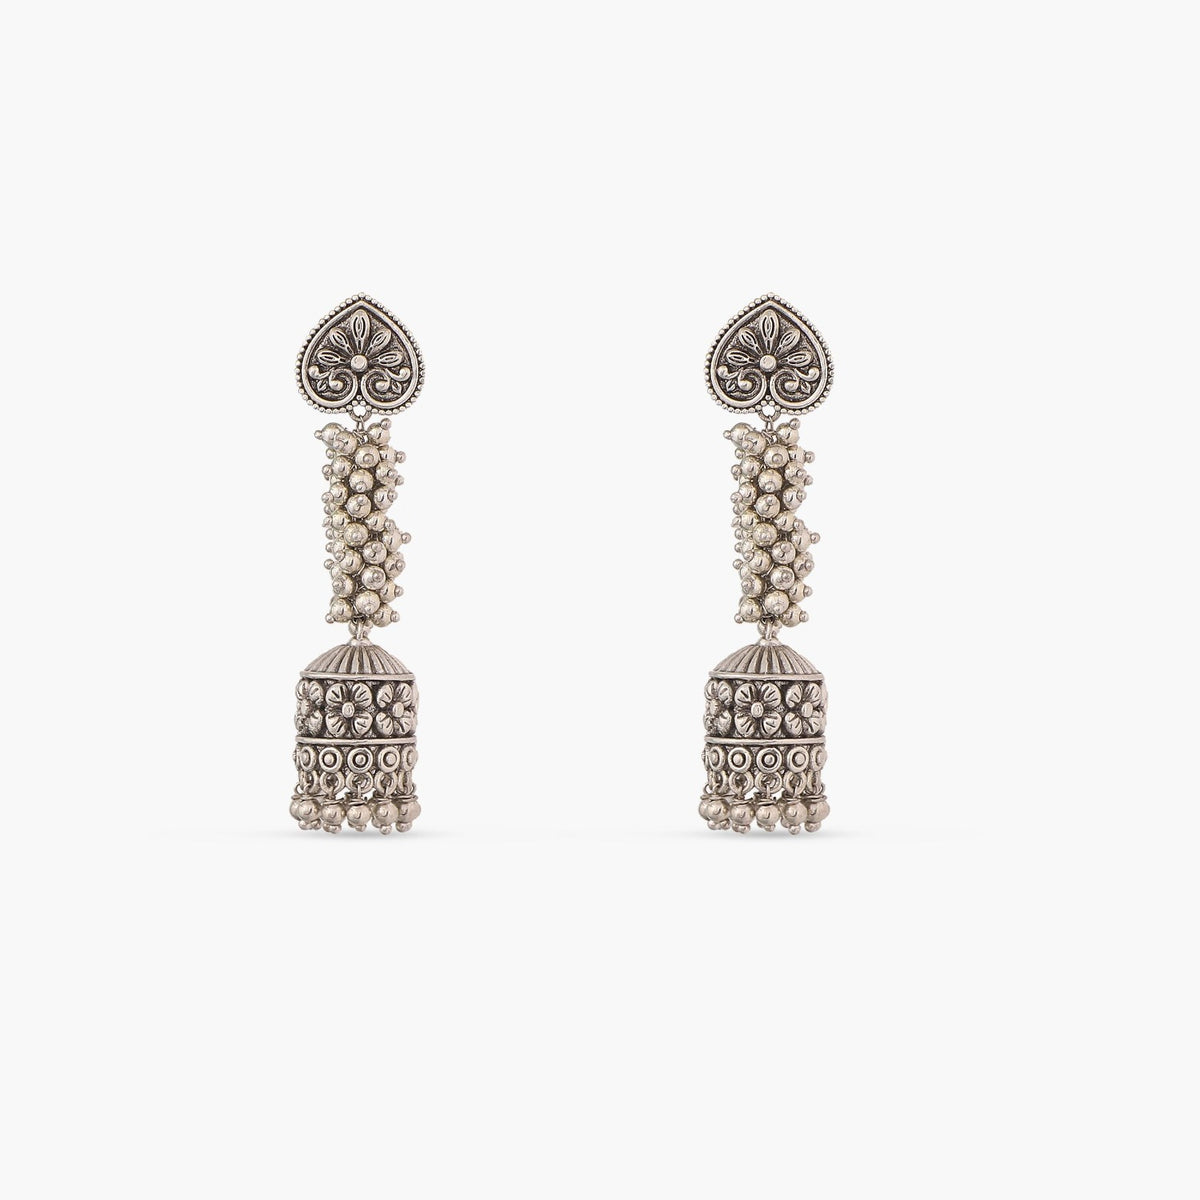 Maati Sparkling Antique Oxidized Drop Earrings